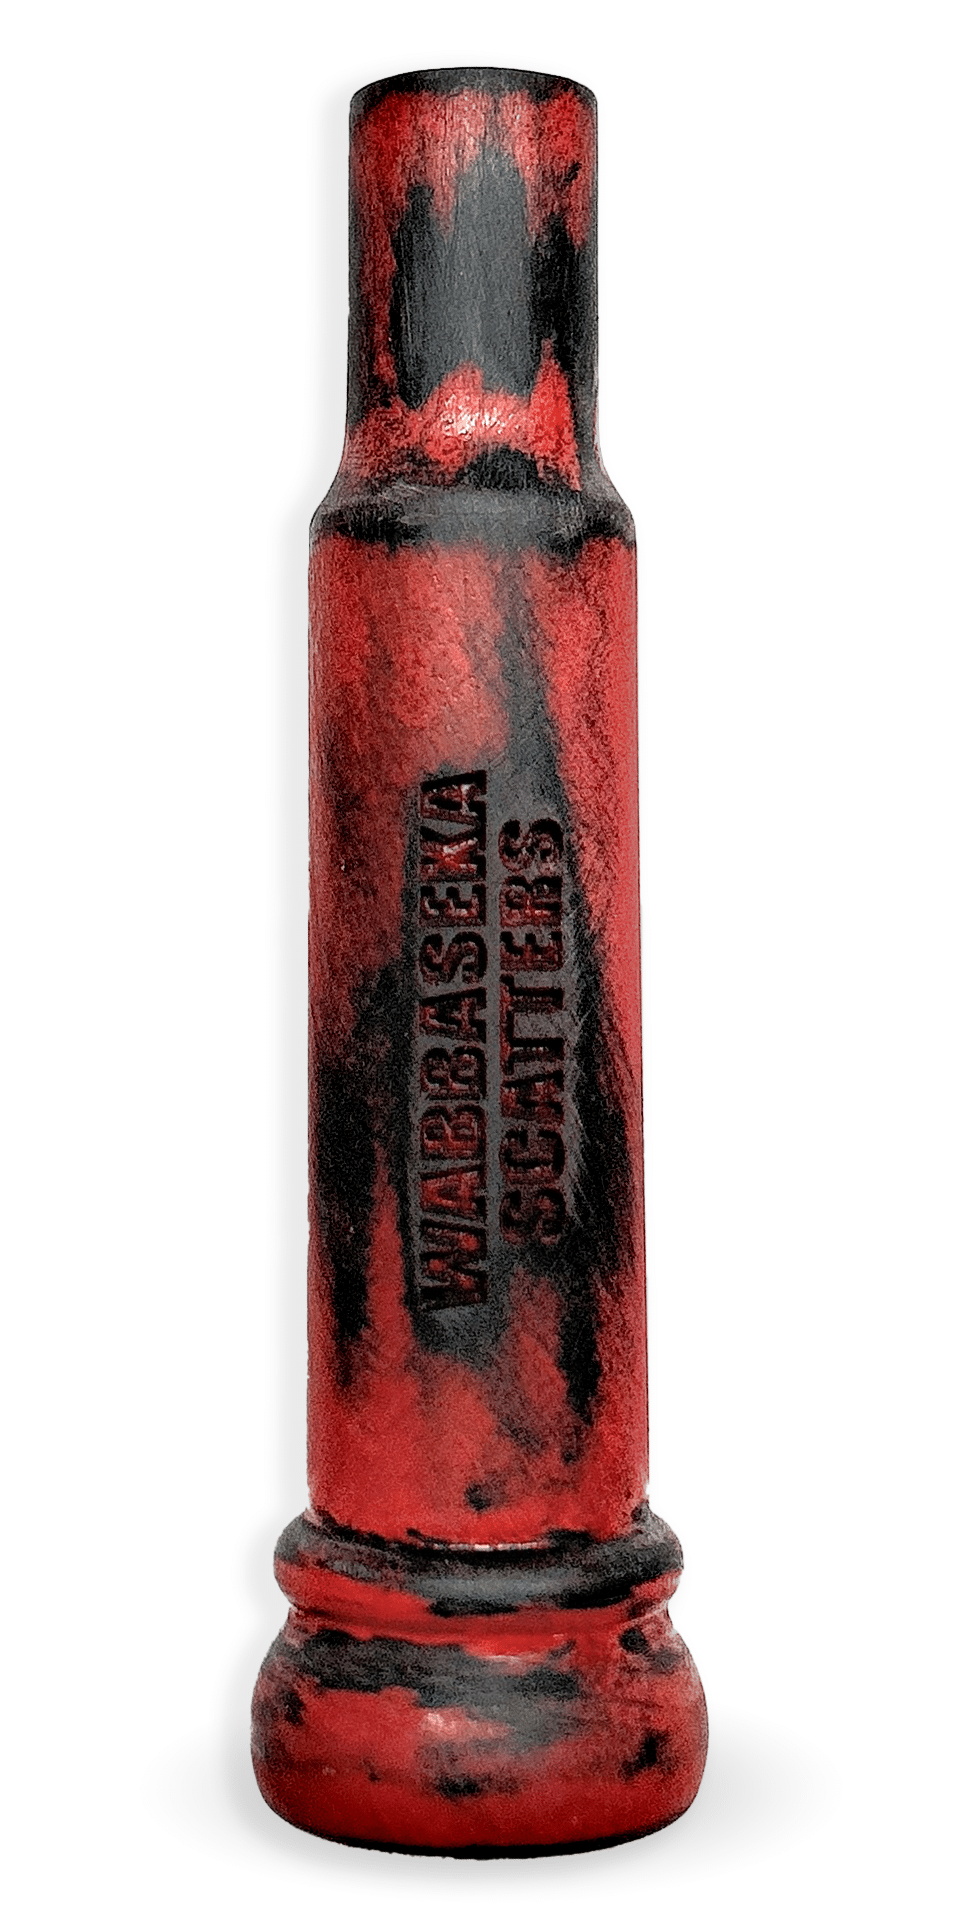 Wabbaseka Scatters Edition Blood on the Water Threaded Keyhole Cut-Down Duck Call Experience Unmatched Precision in Waterfowl Hunting Introducing the Wabbaseka Scatters Edition Threaded Keyhole Cut-Down Duck Call in "Blood on the Water." Crafted in the heart of Bayou Meto, Arkansas, this exceptional duck call combines rich hunting traditions with top-tier performance for hunters of all skill levels. Key Features: Exceptional Sound Quality: Designed by the legendary Kirk McCullough, the Wabbaseka Scatters Edition produces loud, smooth, and authentic duck sounds. Enjoy remarkable resonance and ease of use, delivering an immersive hunting experience with realistic and captivating calls. Premium Acrylic Construction: Crafted from high-quality acrylic, this duck call features a precisely threaded insert for a secure fit. The true keyhole-style insert, with its aggressive cut, ensures distinctive and lifelike sounds, perfect for an authentic hunting experience. Harmonious Tones: Equipped with a 14 Mil Reed, traditional D2 Style Duck Call, and Rim-Cut Tone Board, this call produces a unique blend of tones that are easy to blow and exceptionally loud. Ideal for newcomers and a reliable tool for seasoned hunters alike. Customizable Performance: The threaded keyhole insert ensures consistent performance. To enhance your hunting experience, the call comes with three extra reeds and cork, allowing hunters to customize their calls to suit their preferences and hunting conditions. Precision Craftsmanship: Each Wabbaseka Scatters Edition call is meticulously designed, cut, and hand-tuned by Kirk McCullough. This ensures unparalleled quality and performance for every waterfowl enthusiast. American-Made Excellence: Proudly cast and crafted in the USA from hard-cast acrylic, this duck call symbolizes precision and durability. It upholds a legacy of excellence in waterfowl hunting, inviting hunters to join the rich tradition of the flooded timberlands of Arkansas. Highlights: Authentic Hunting Tradition: The Wabbaseka Scatters Edition honors the esteemed waterfowl hunting traditions of Bayou Meto with its exceptional design and craftsmanship. User-Friendly Design: Balancing ease of use with impressive loudness, this call is suitable for hunters of all ages and experience levels, making it an ideal starter for newcomers to waterfowl hunting. Versatile and Reliable: With its customizable features and dependable performance, the Wabbaseka Scatters Edition is a must-have for any serious duck hunter. Elevate your waterfowl hunting game with the Wabbaseka Scatters Edition Threaded Keyhole Cut-Down Duck Call in "Blood on the Water." More than just a hunting tool, it’s a symbol of dedication, tradition, and unmatched performance. Join the legacy and experience excellence in every call.